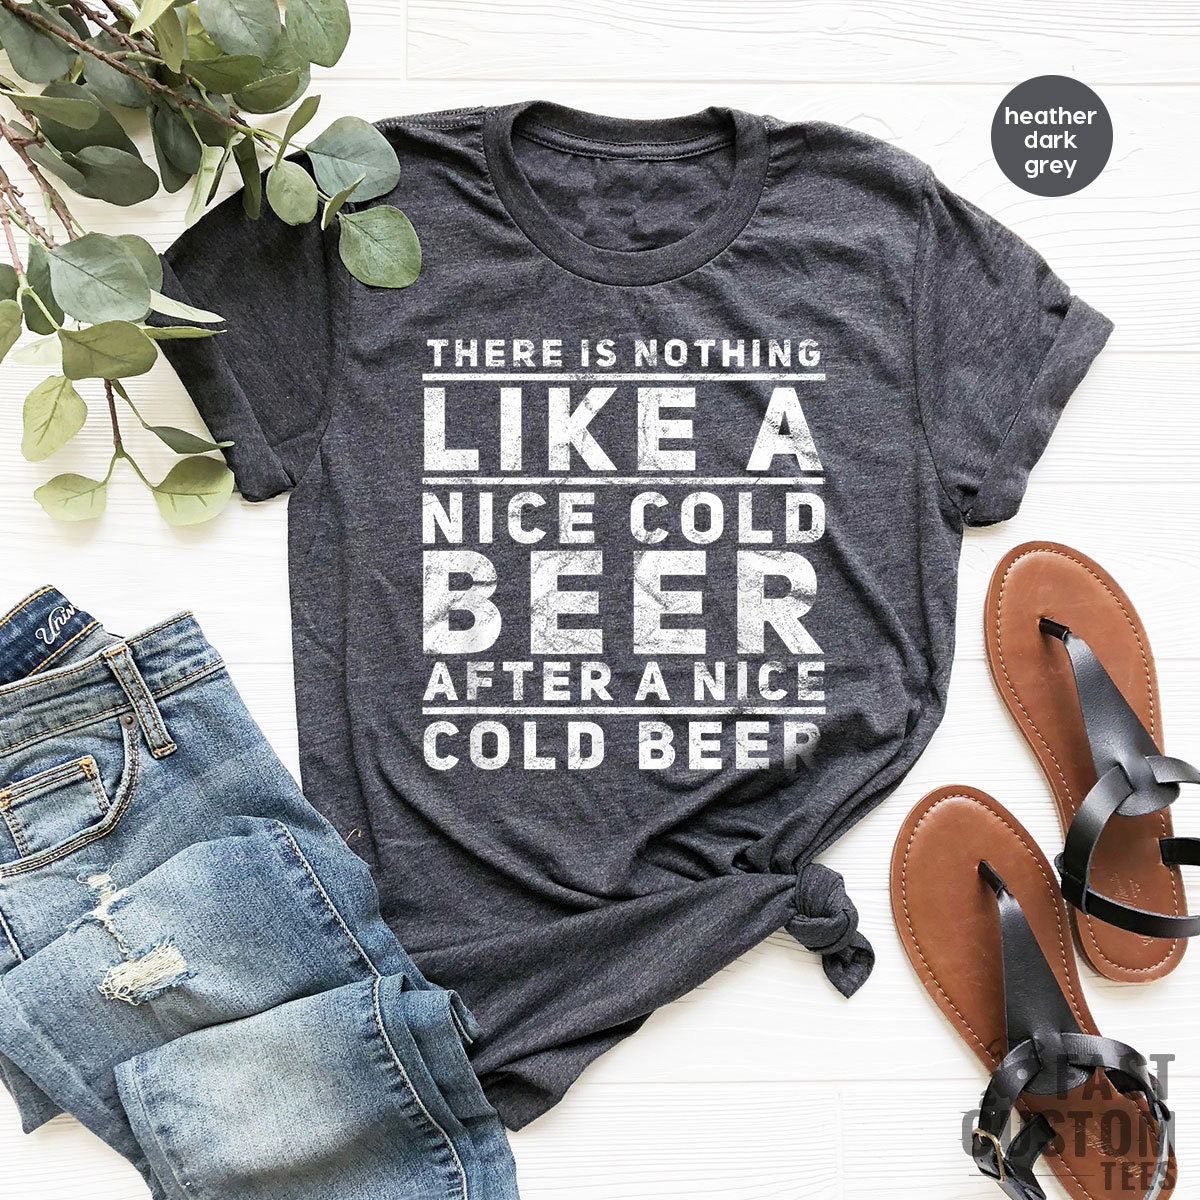 Beer Shirt, Oktoberfest Shirt, Drinking T-Shirt, There Is Nothing Like A Nice Cold Beer After A Nice Cold Beer, Alcohol Shirt, Day Drinker - Fastdeliverytees.com